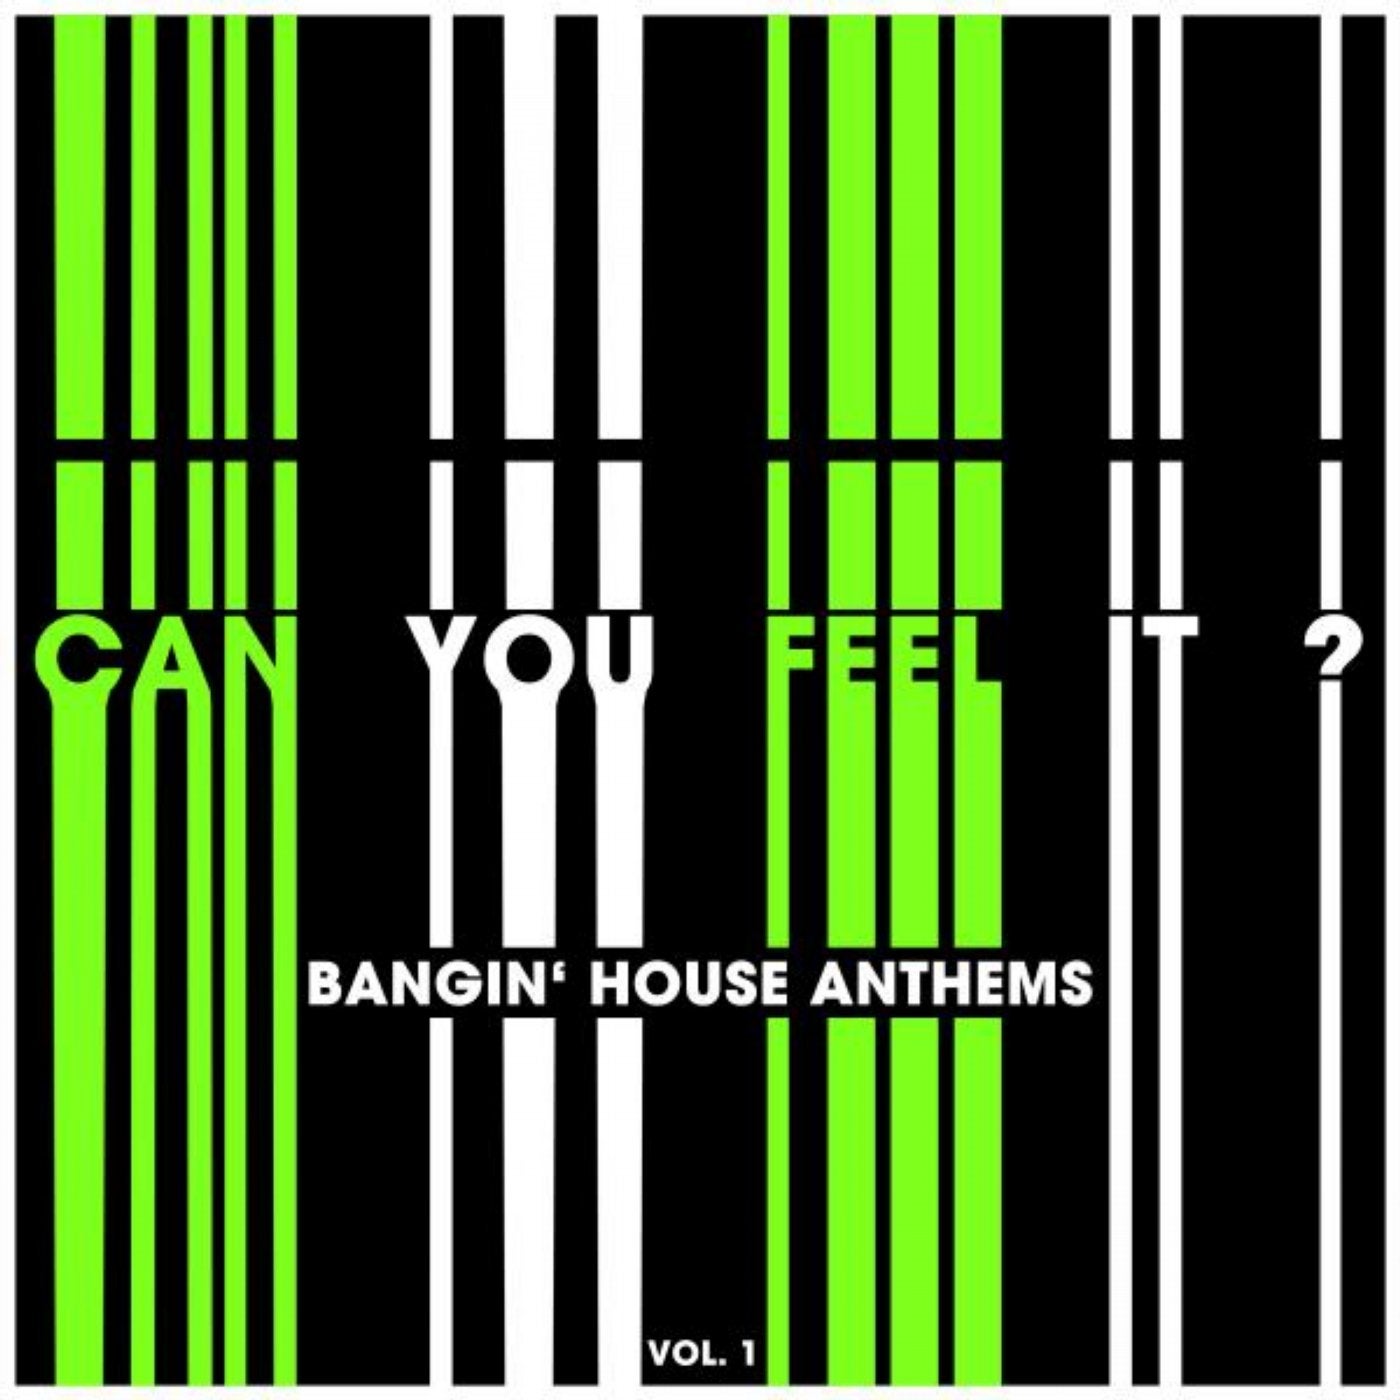 Can You Feel It? (Bangin' House Anthems), Vol. 1